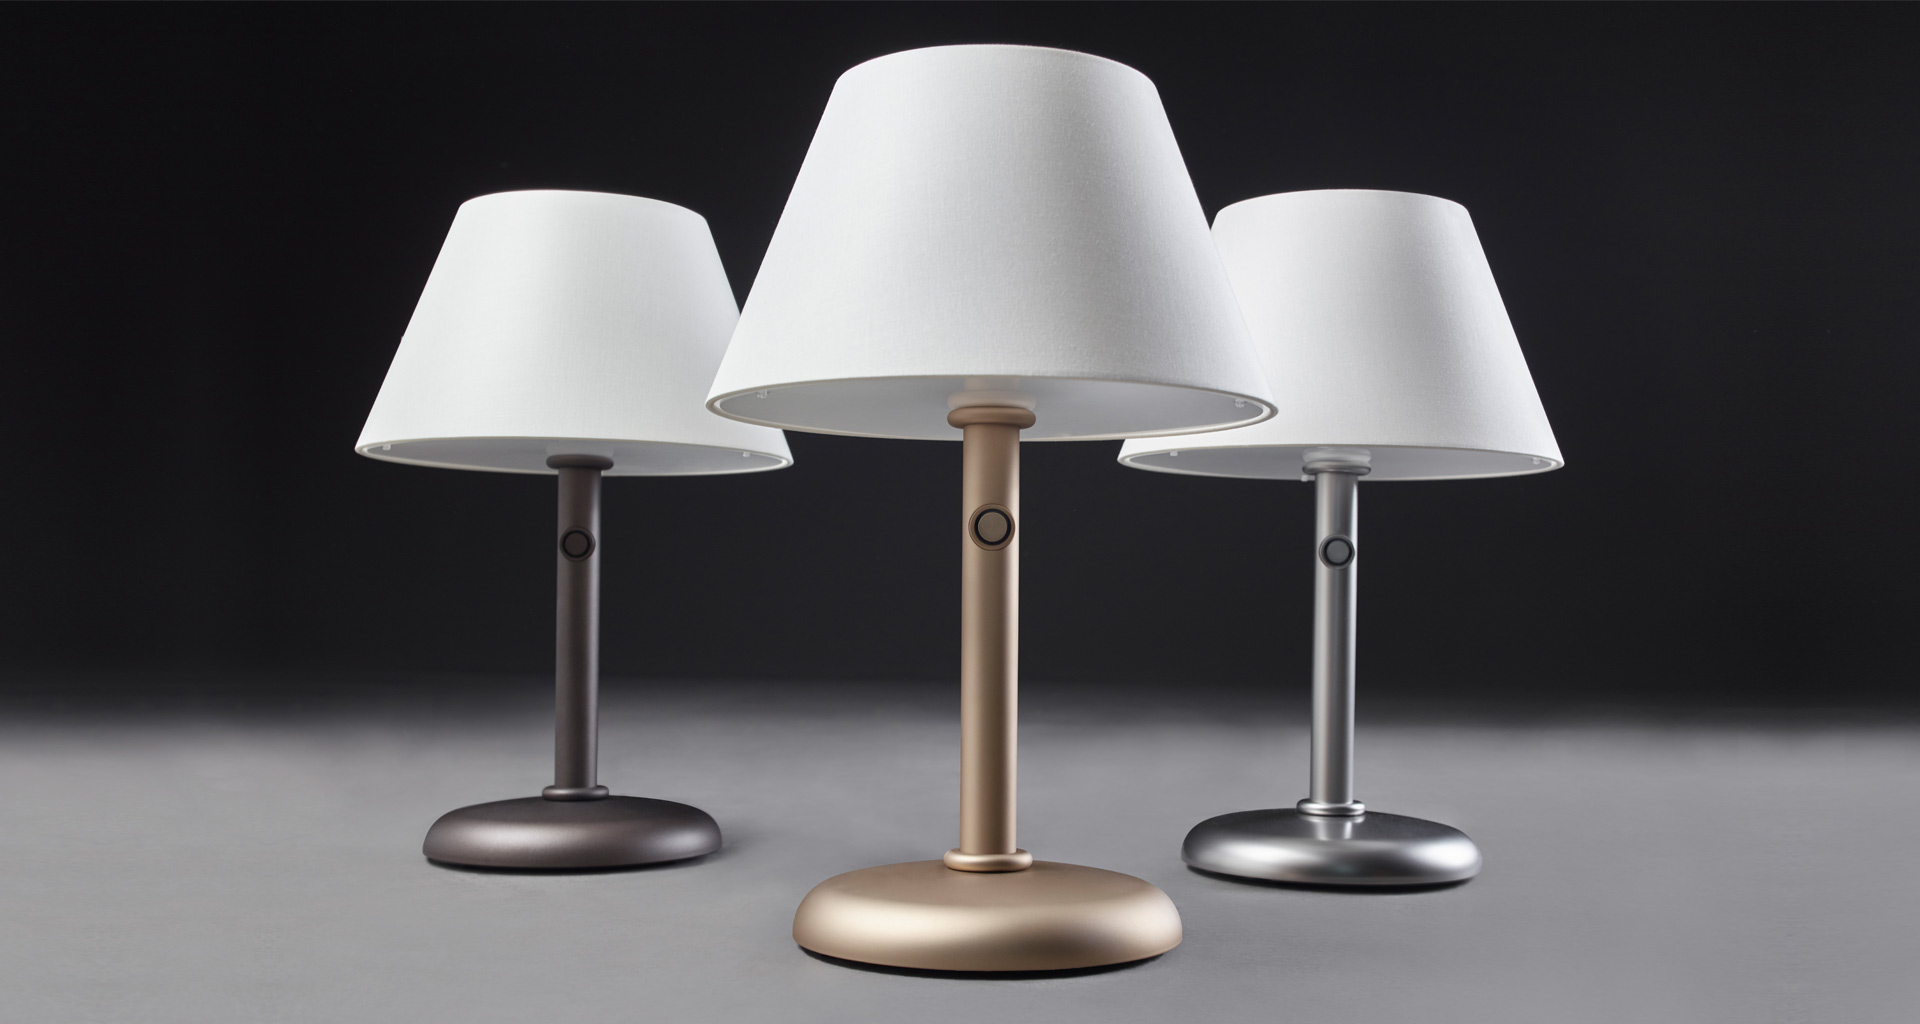 Zip.ico is a LED WiFi table lamp in alluminum with cotton lampshade and methacrylate diffusers, controlled using the Apple Home Kit app, from Promemoria's catalogue | Promemoria